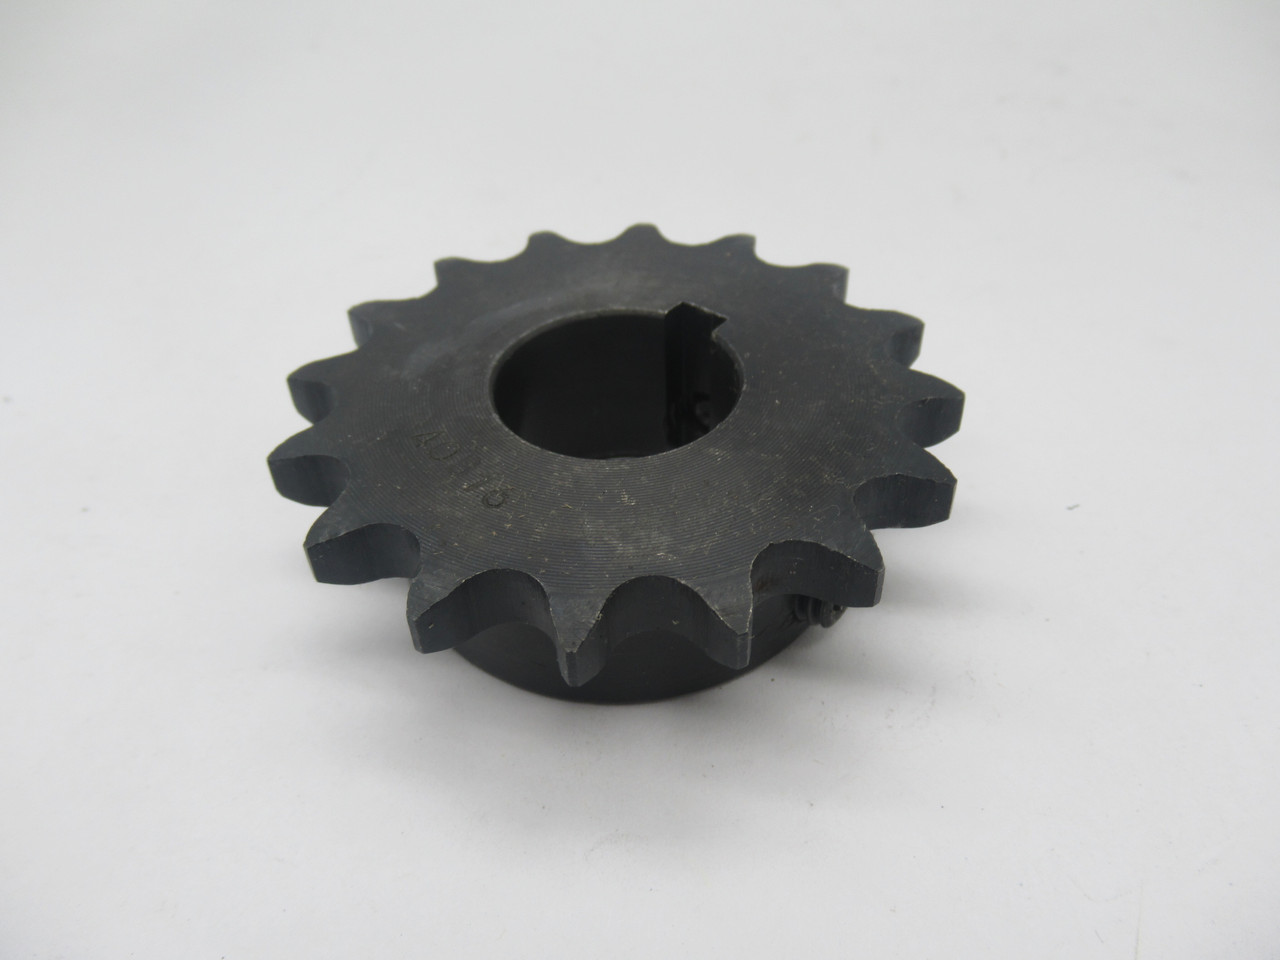 Generic 40B16 Roller Chain Sprocket 1” Bore 16 Teeth 40 Chain 1/2” Pitch USED